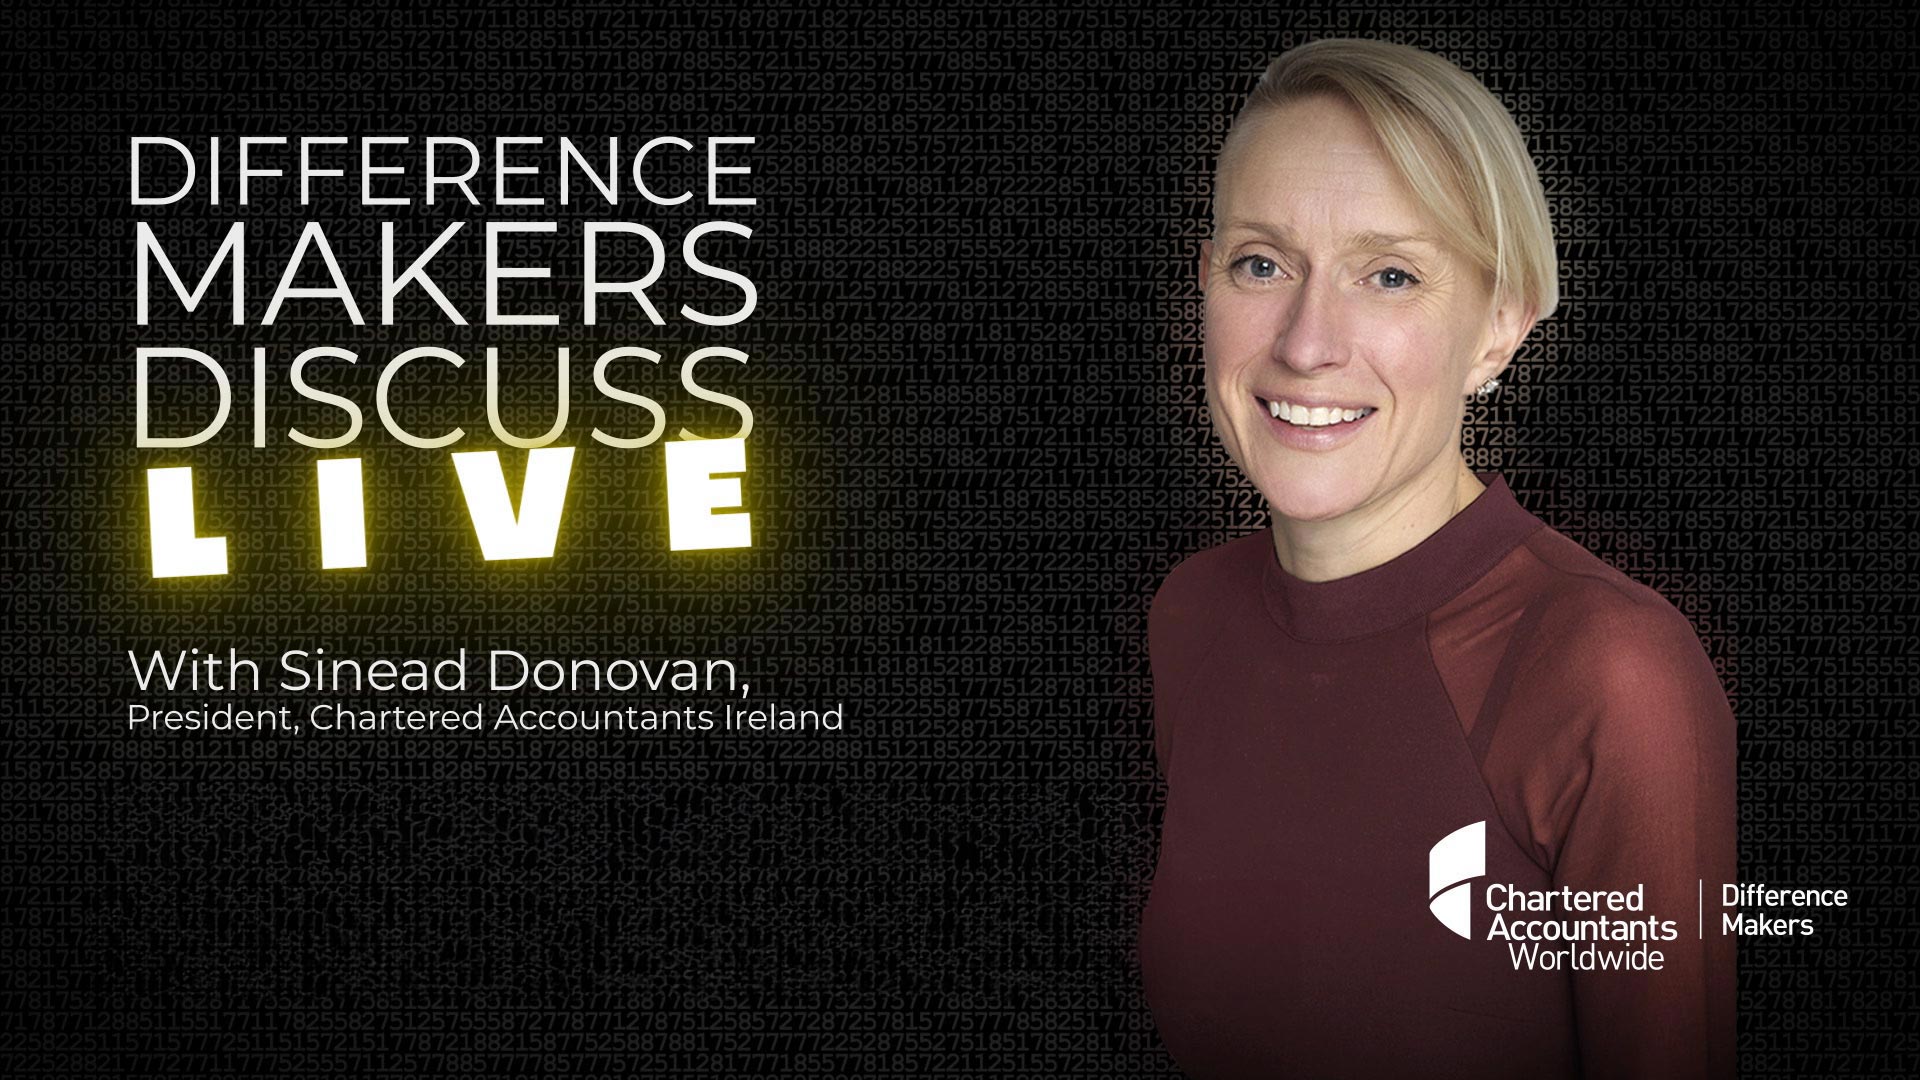 Difference Makers Discuss Live